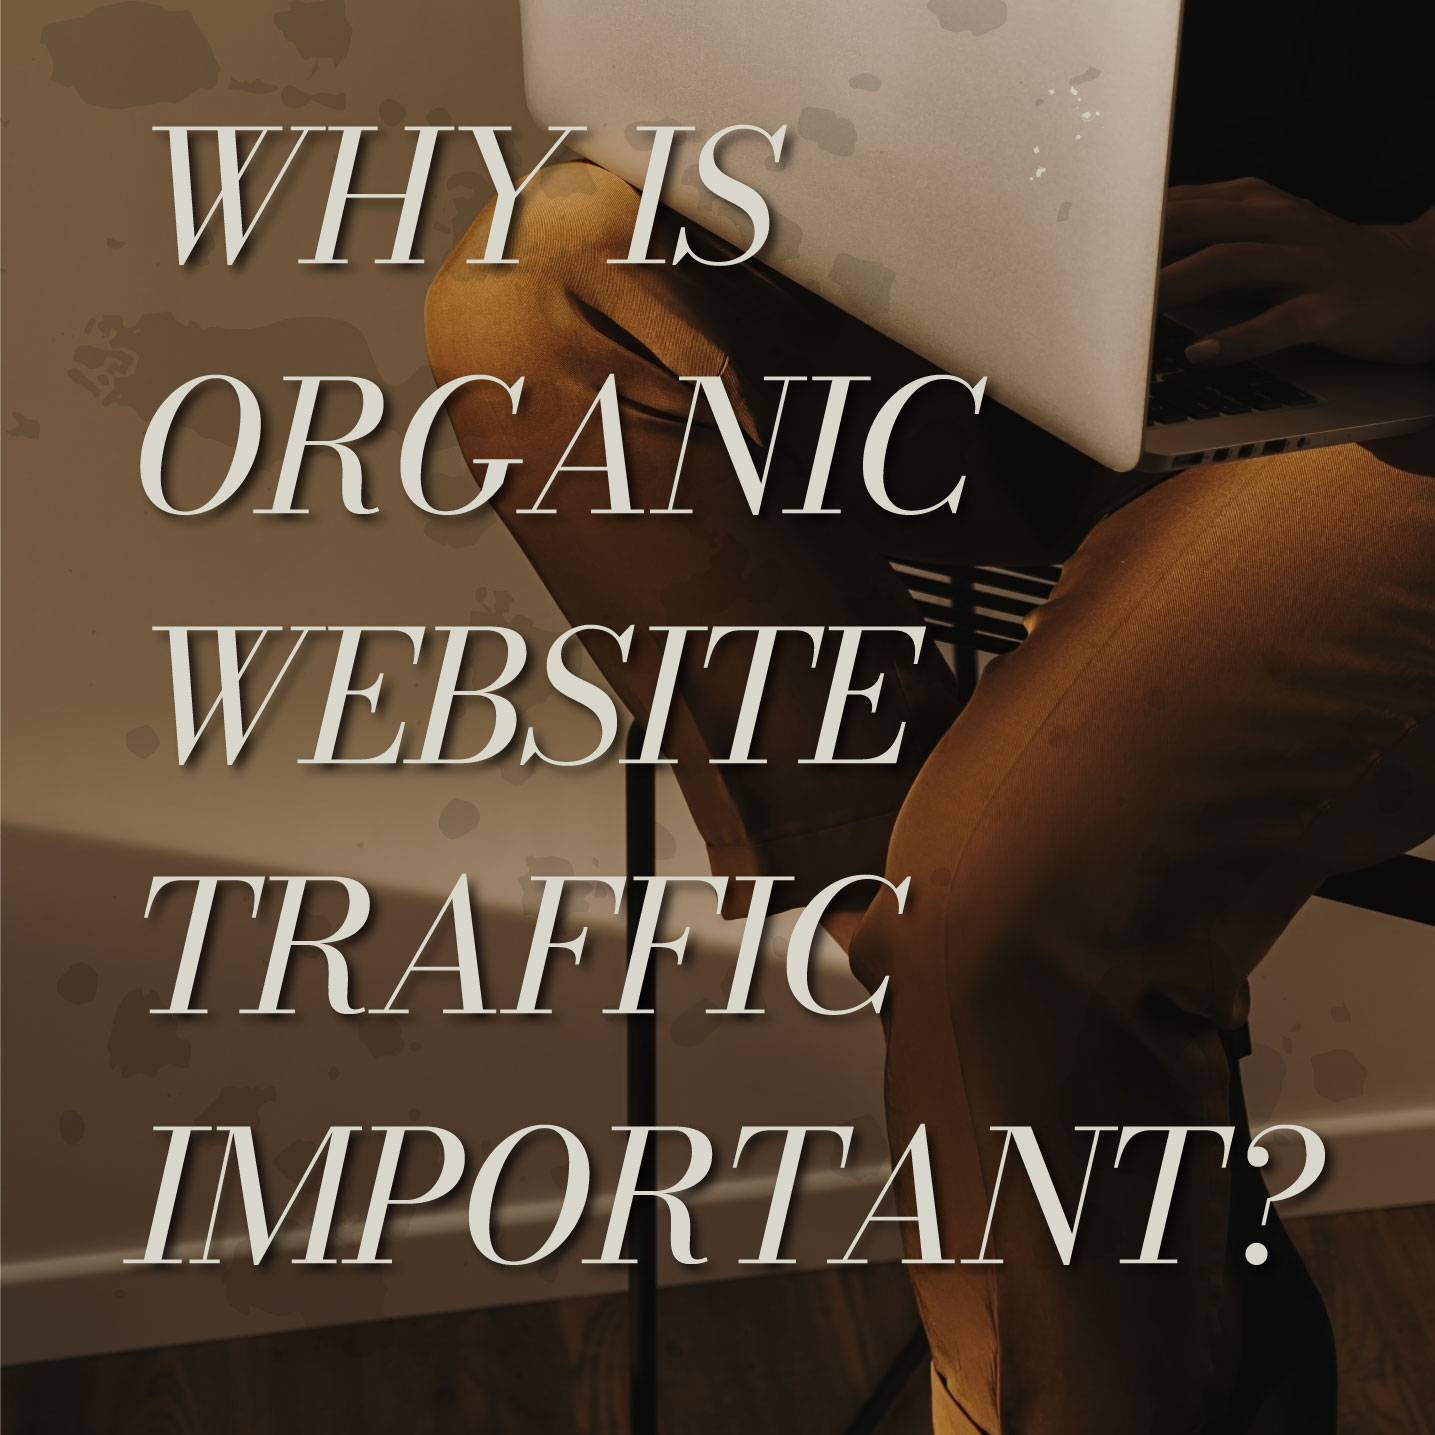 Who Cares About "Organic" Website Views?